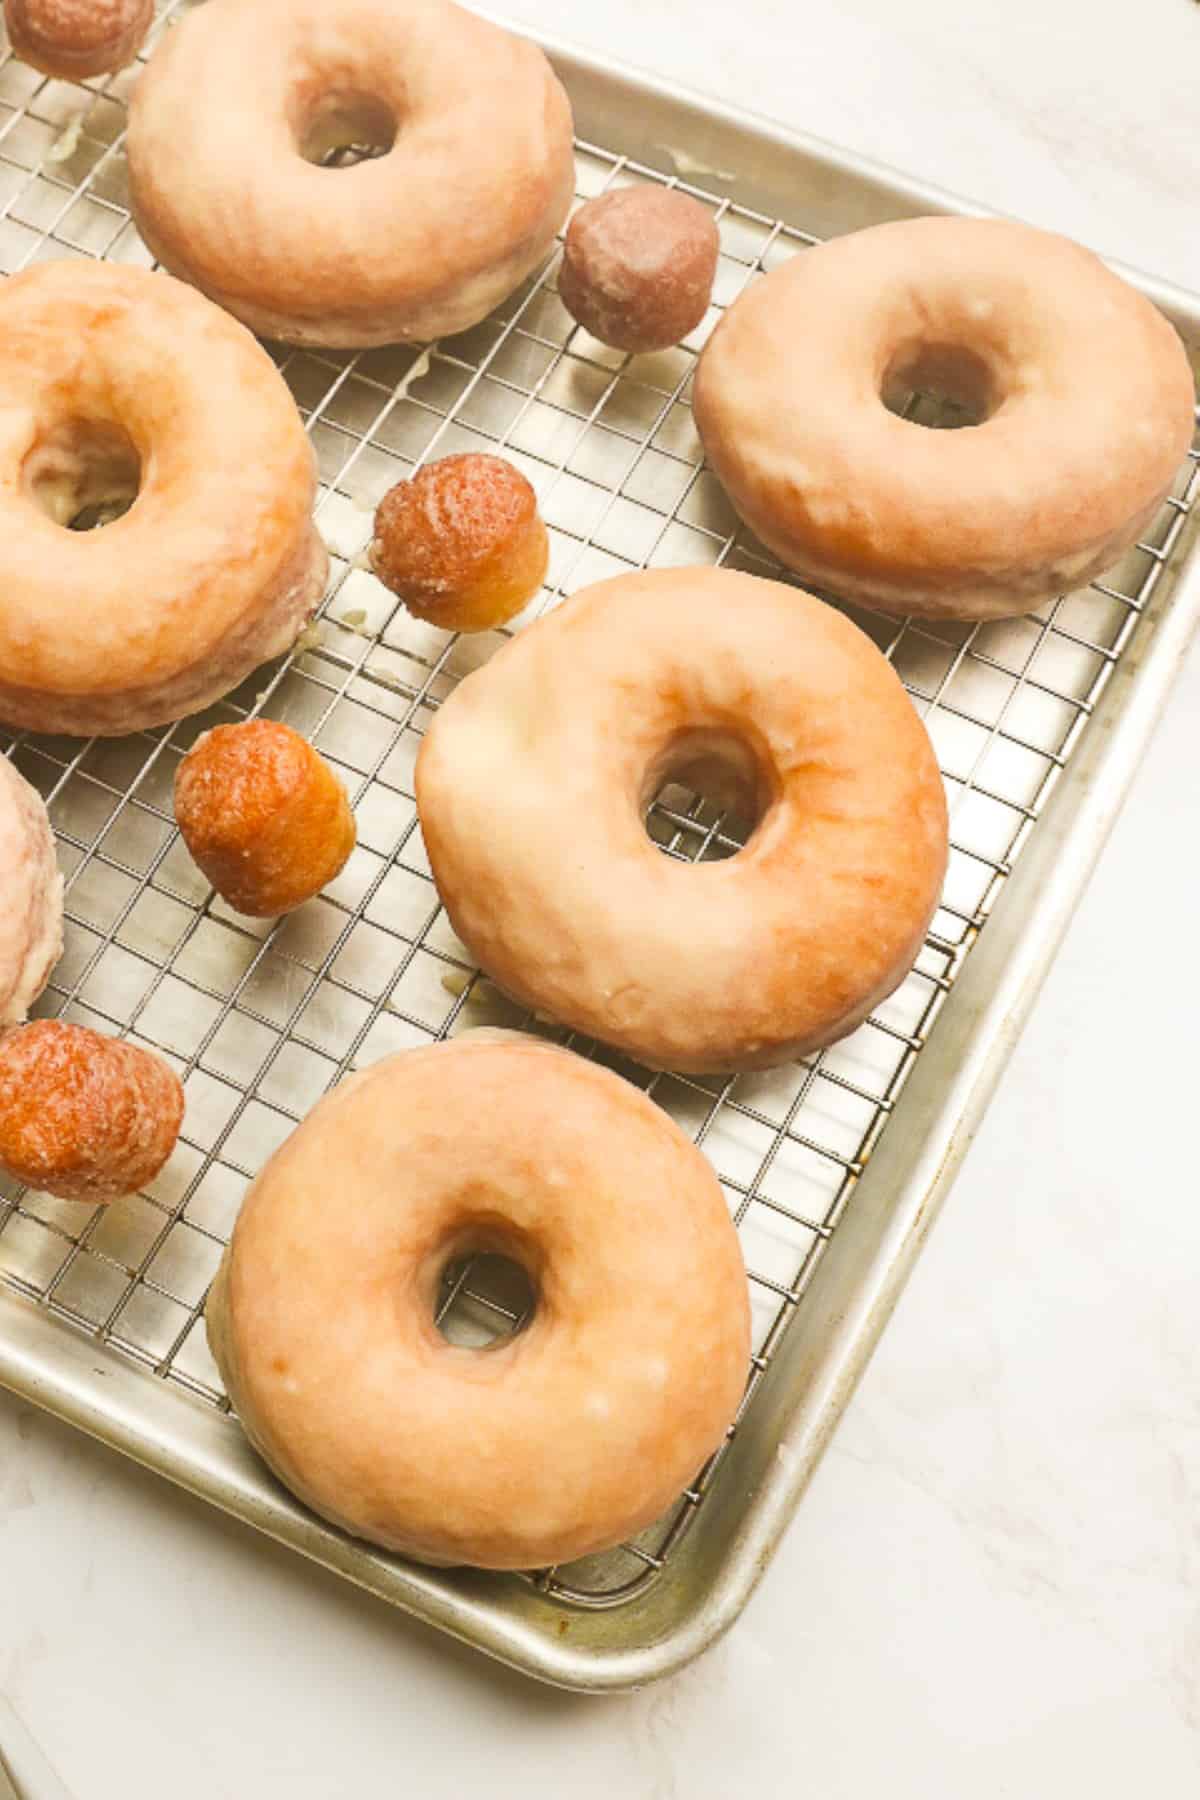 glazed donuts freshly fried are old fashioned comfort food at its finest